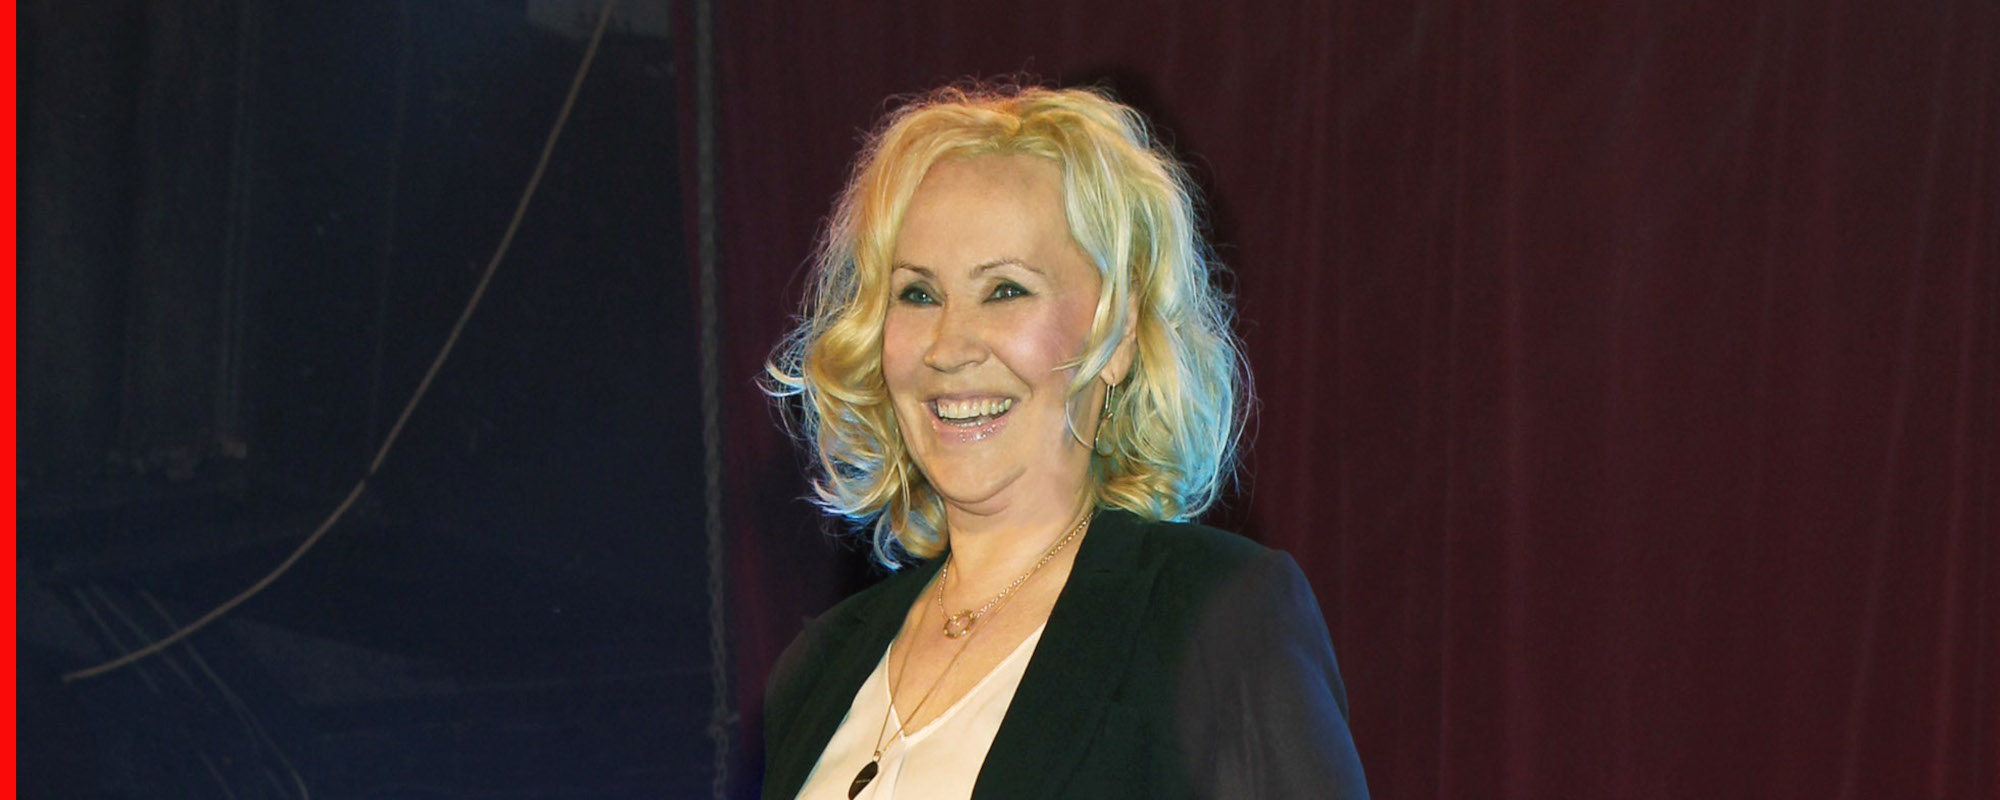 ABBA’s Agnetha Fältskog Releases First New Album in 10 Years with New Song